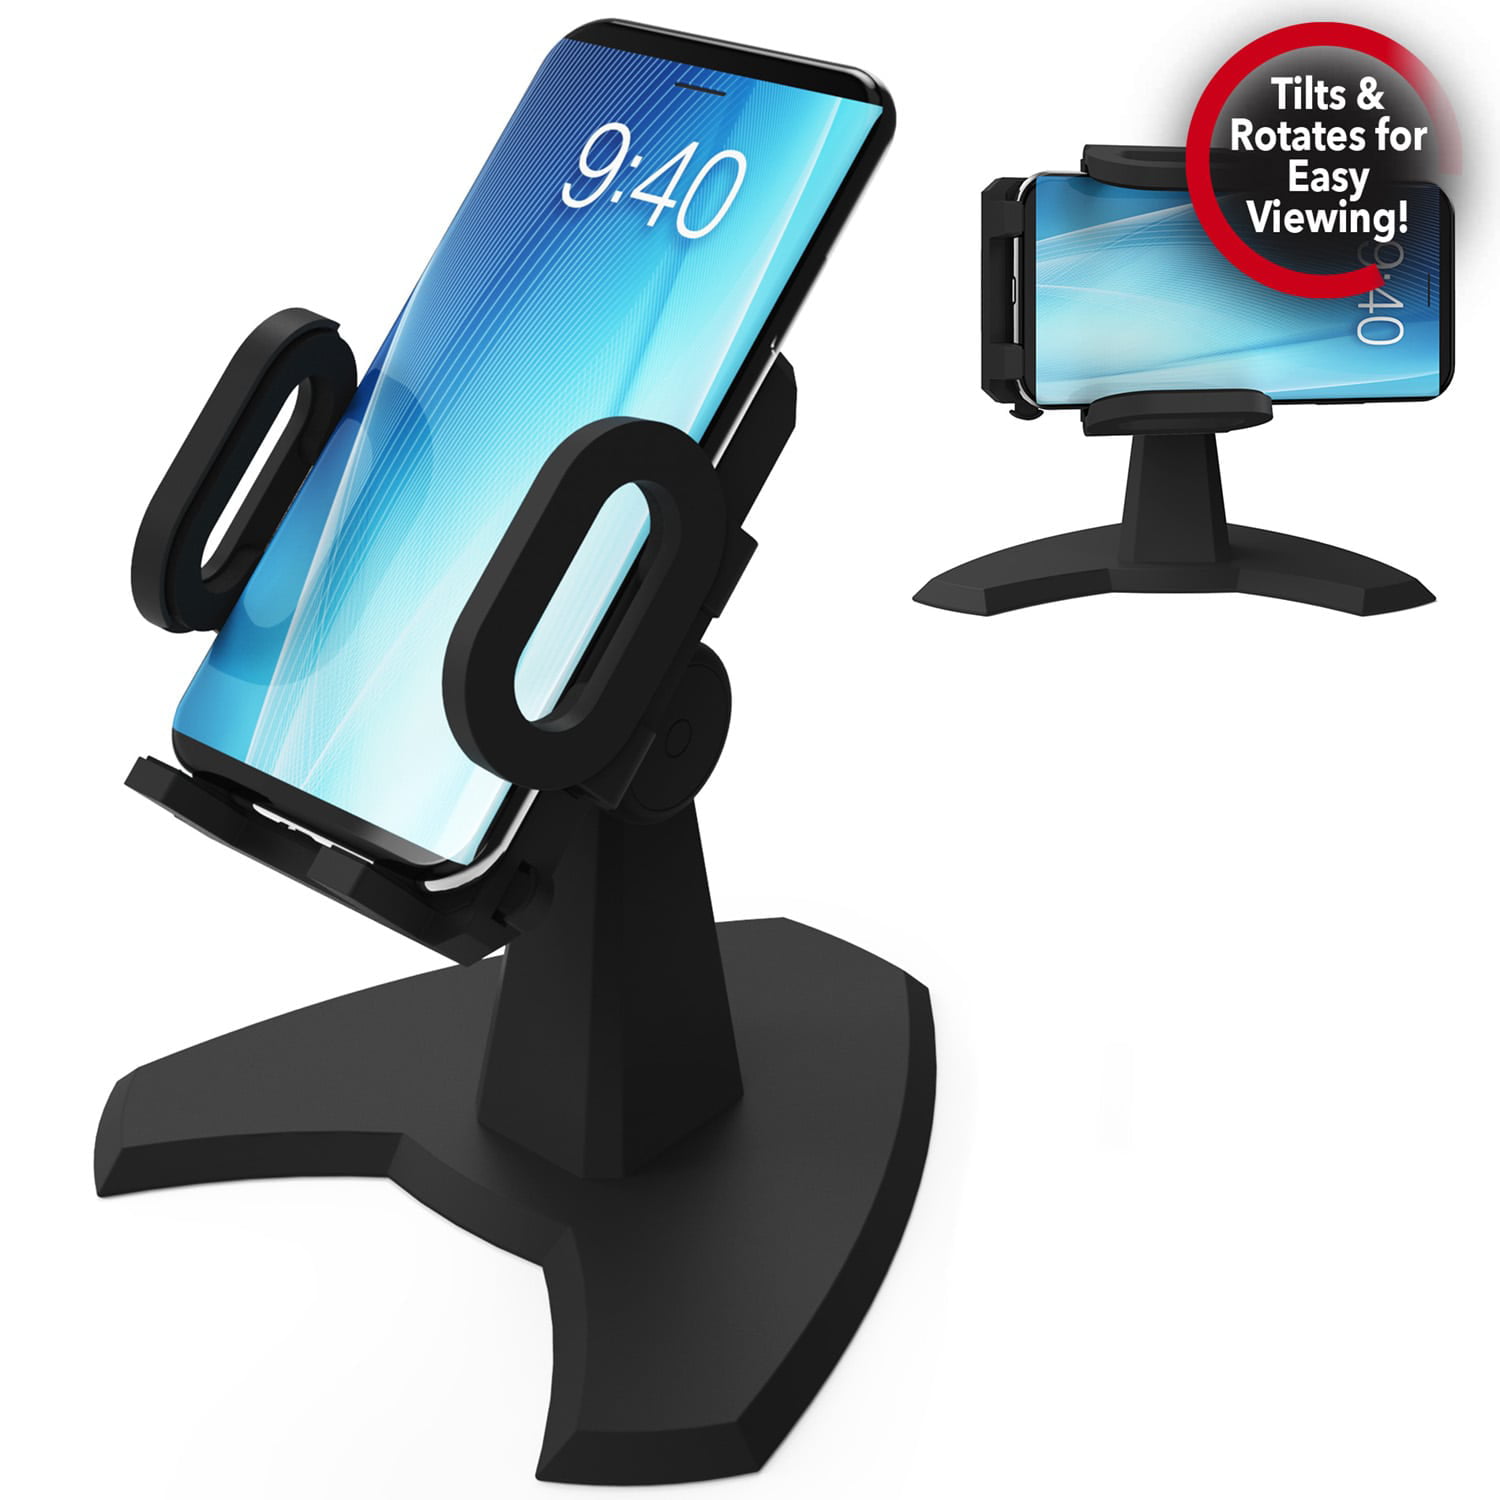 Premium Expanding Phone Socket,Phone Grip and Stand Phone Holder for Smartphone and Tables Cellphones 6pack